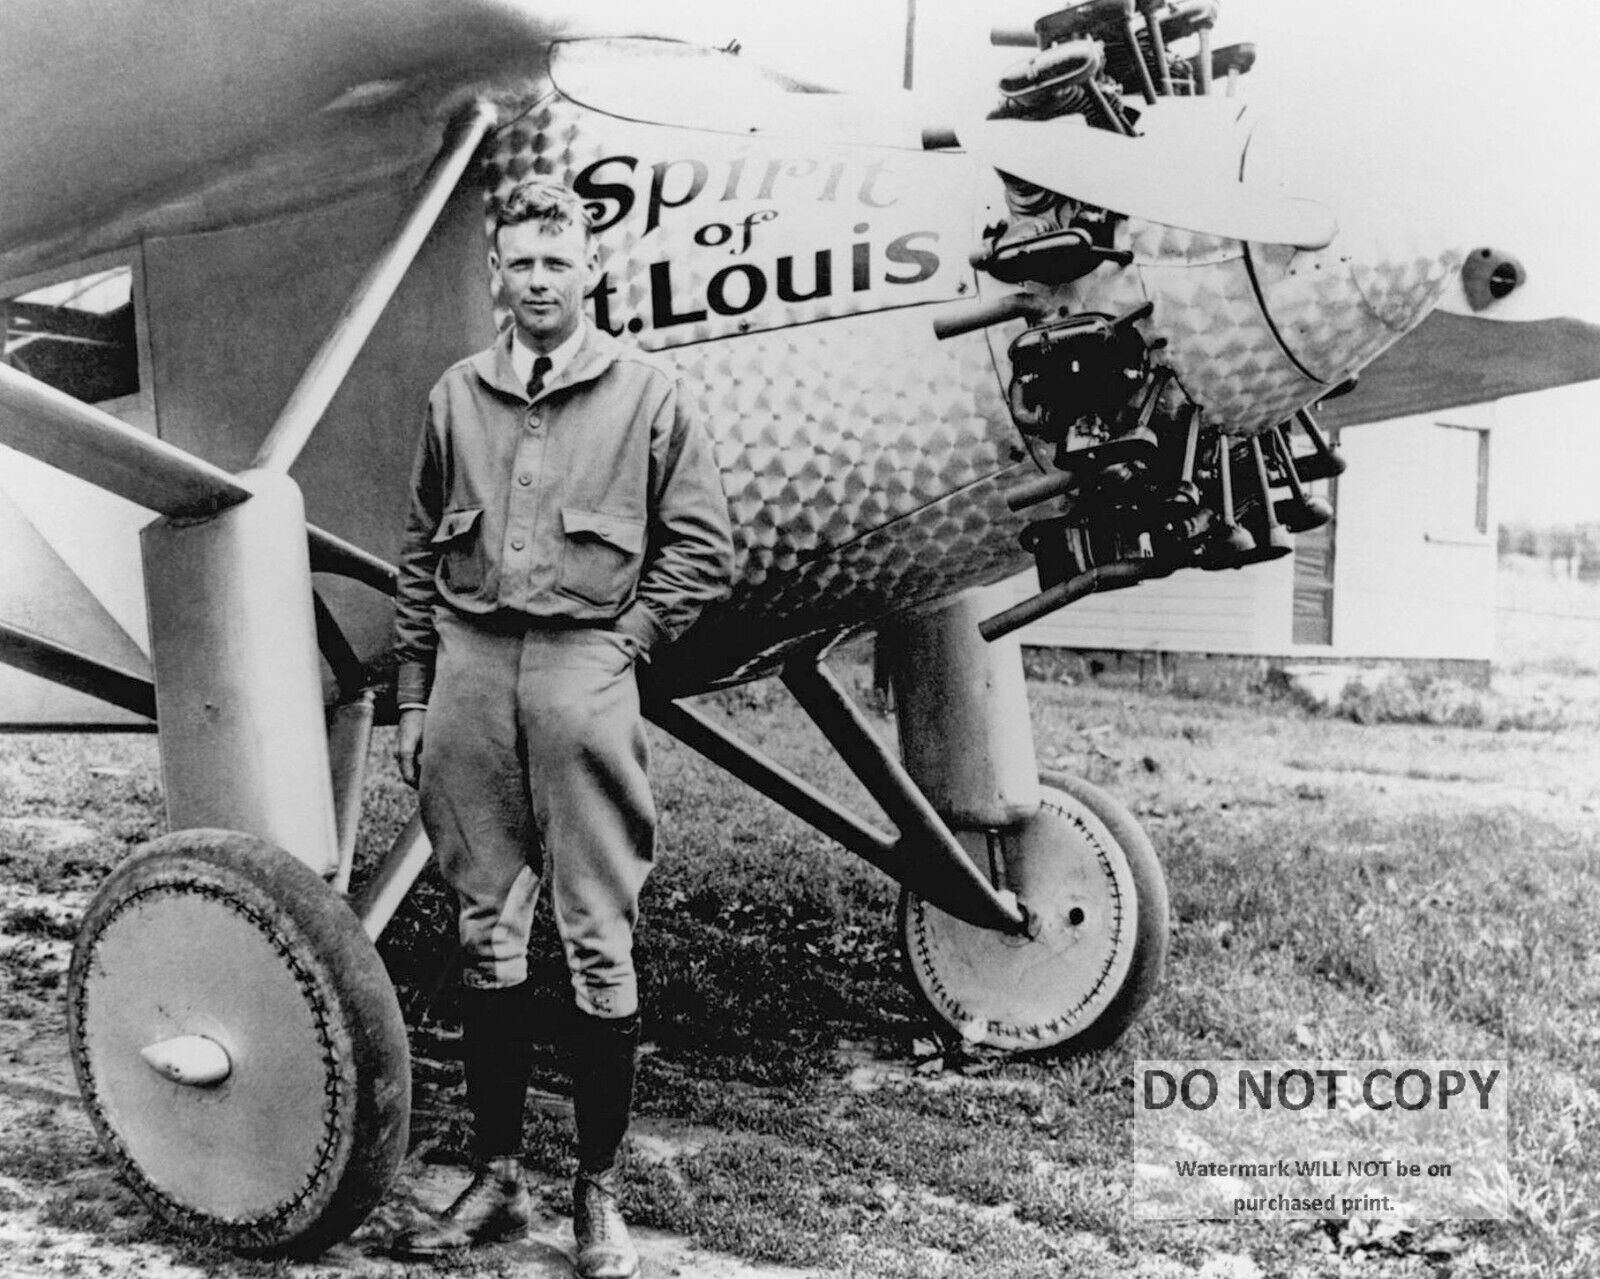 CHARLES LINDBERGH IN FRONT OF PLANE 